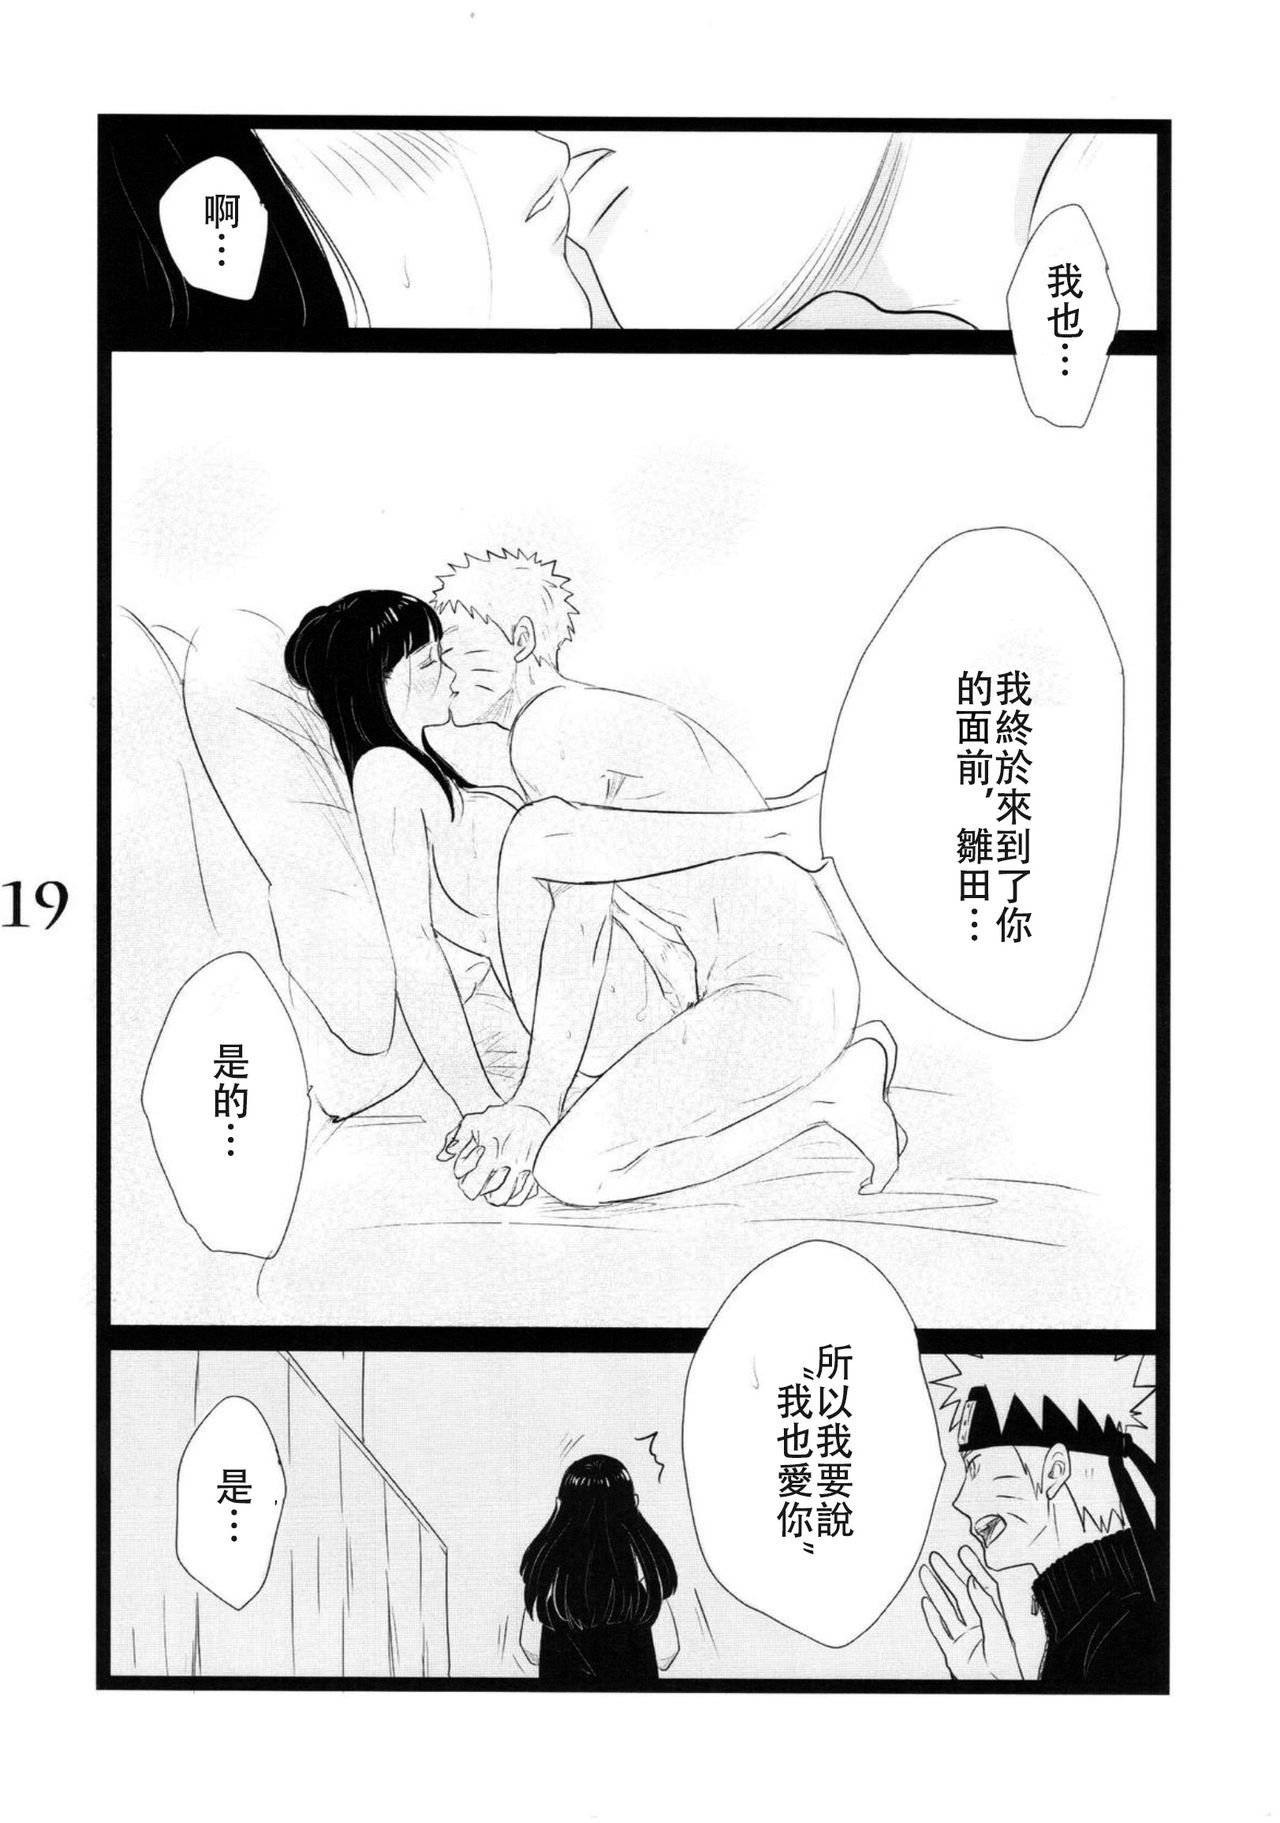 (C88) [blink (shimoyake)] YOUR MY SWEET - I LOVE YOU DARLING (Naruto) [Chinese] [沒有漢化] page 20 full